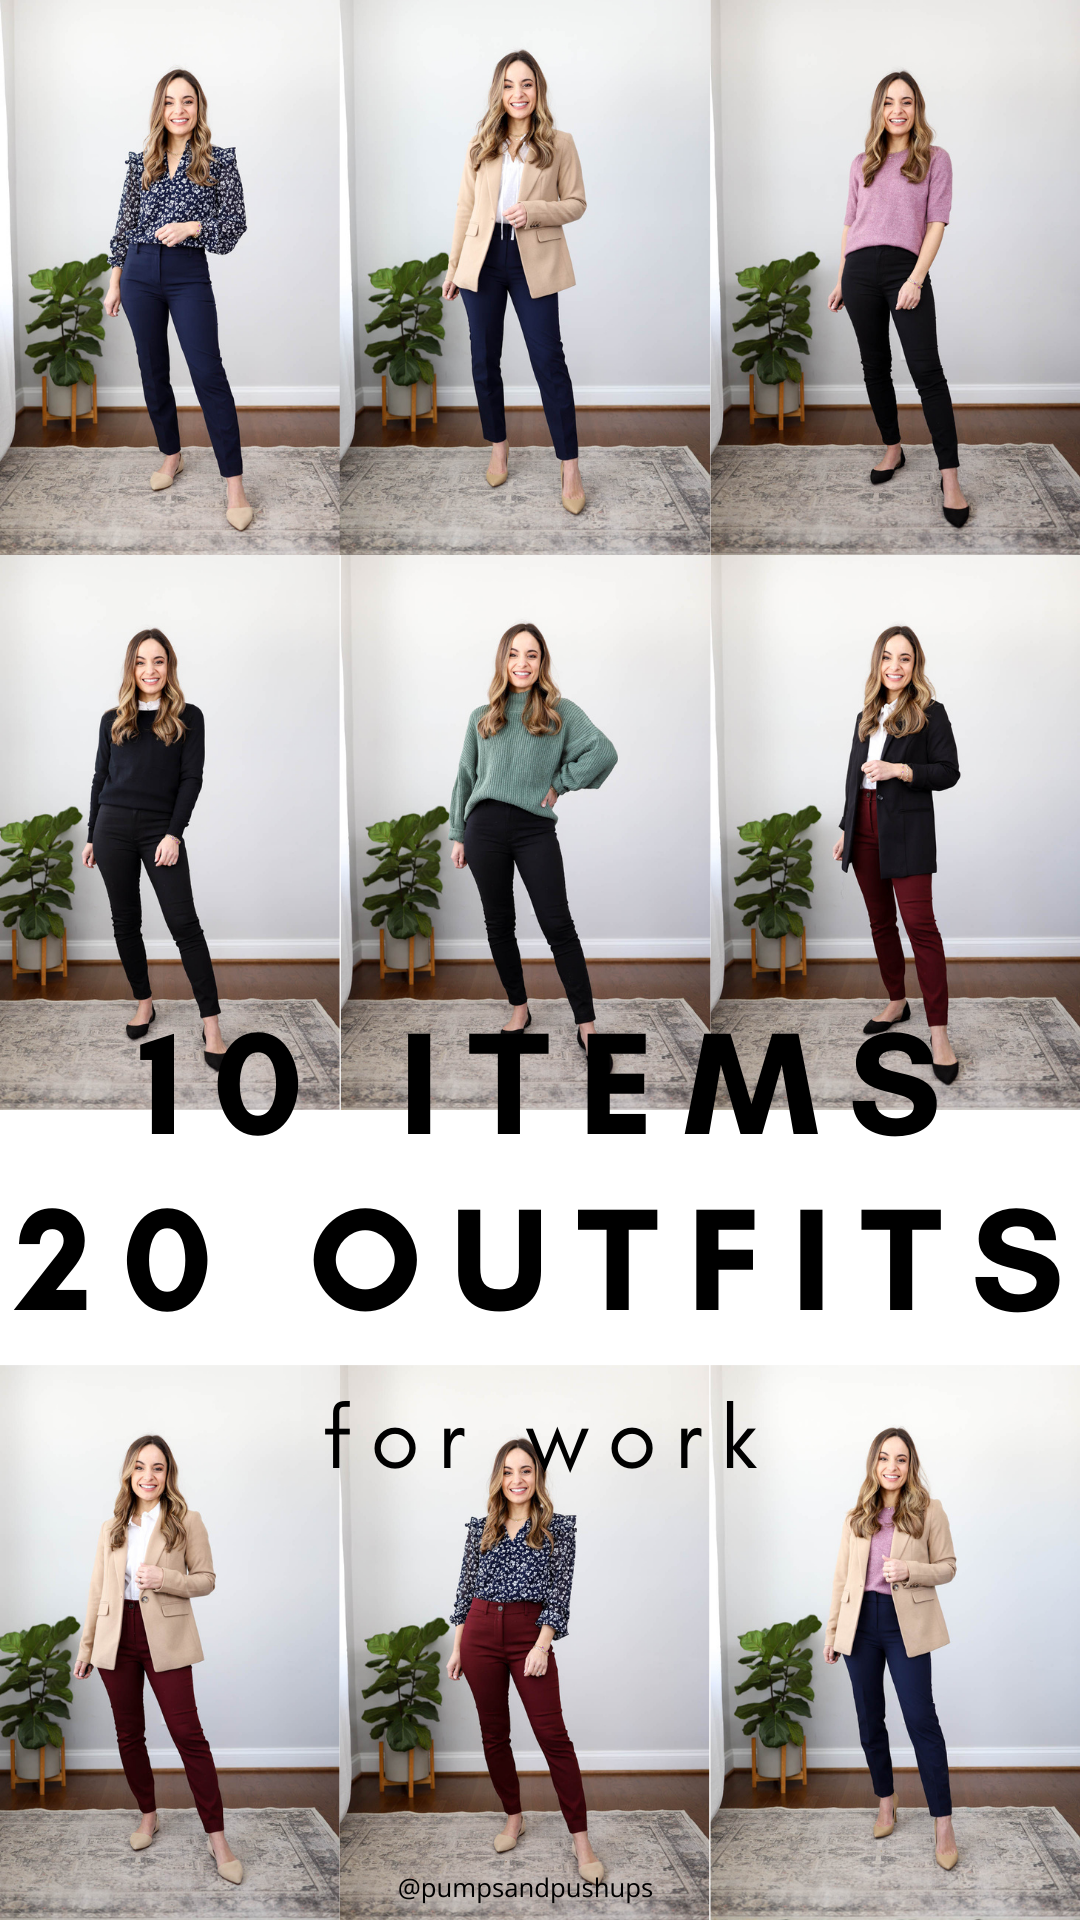 Three Affordable Work Outfits - Brooke's Budget Beauty